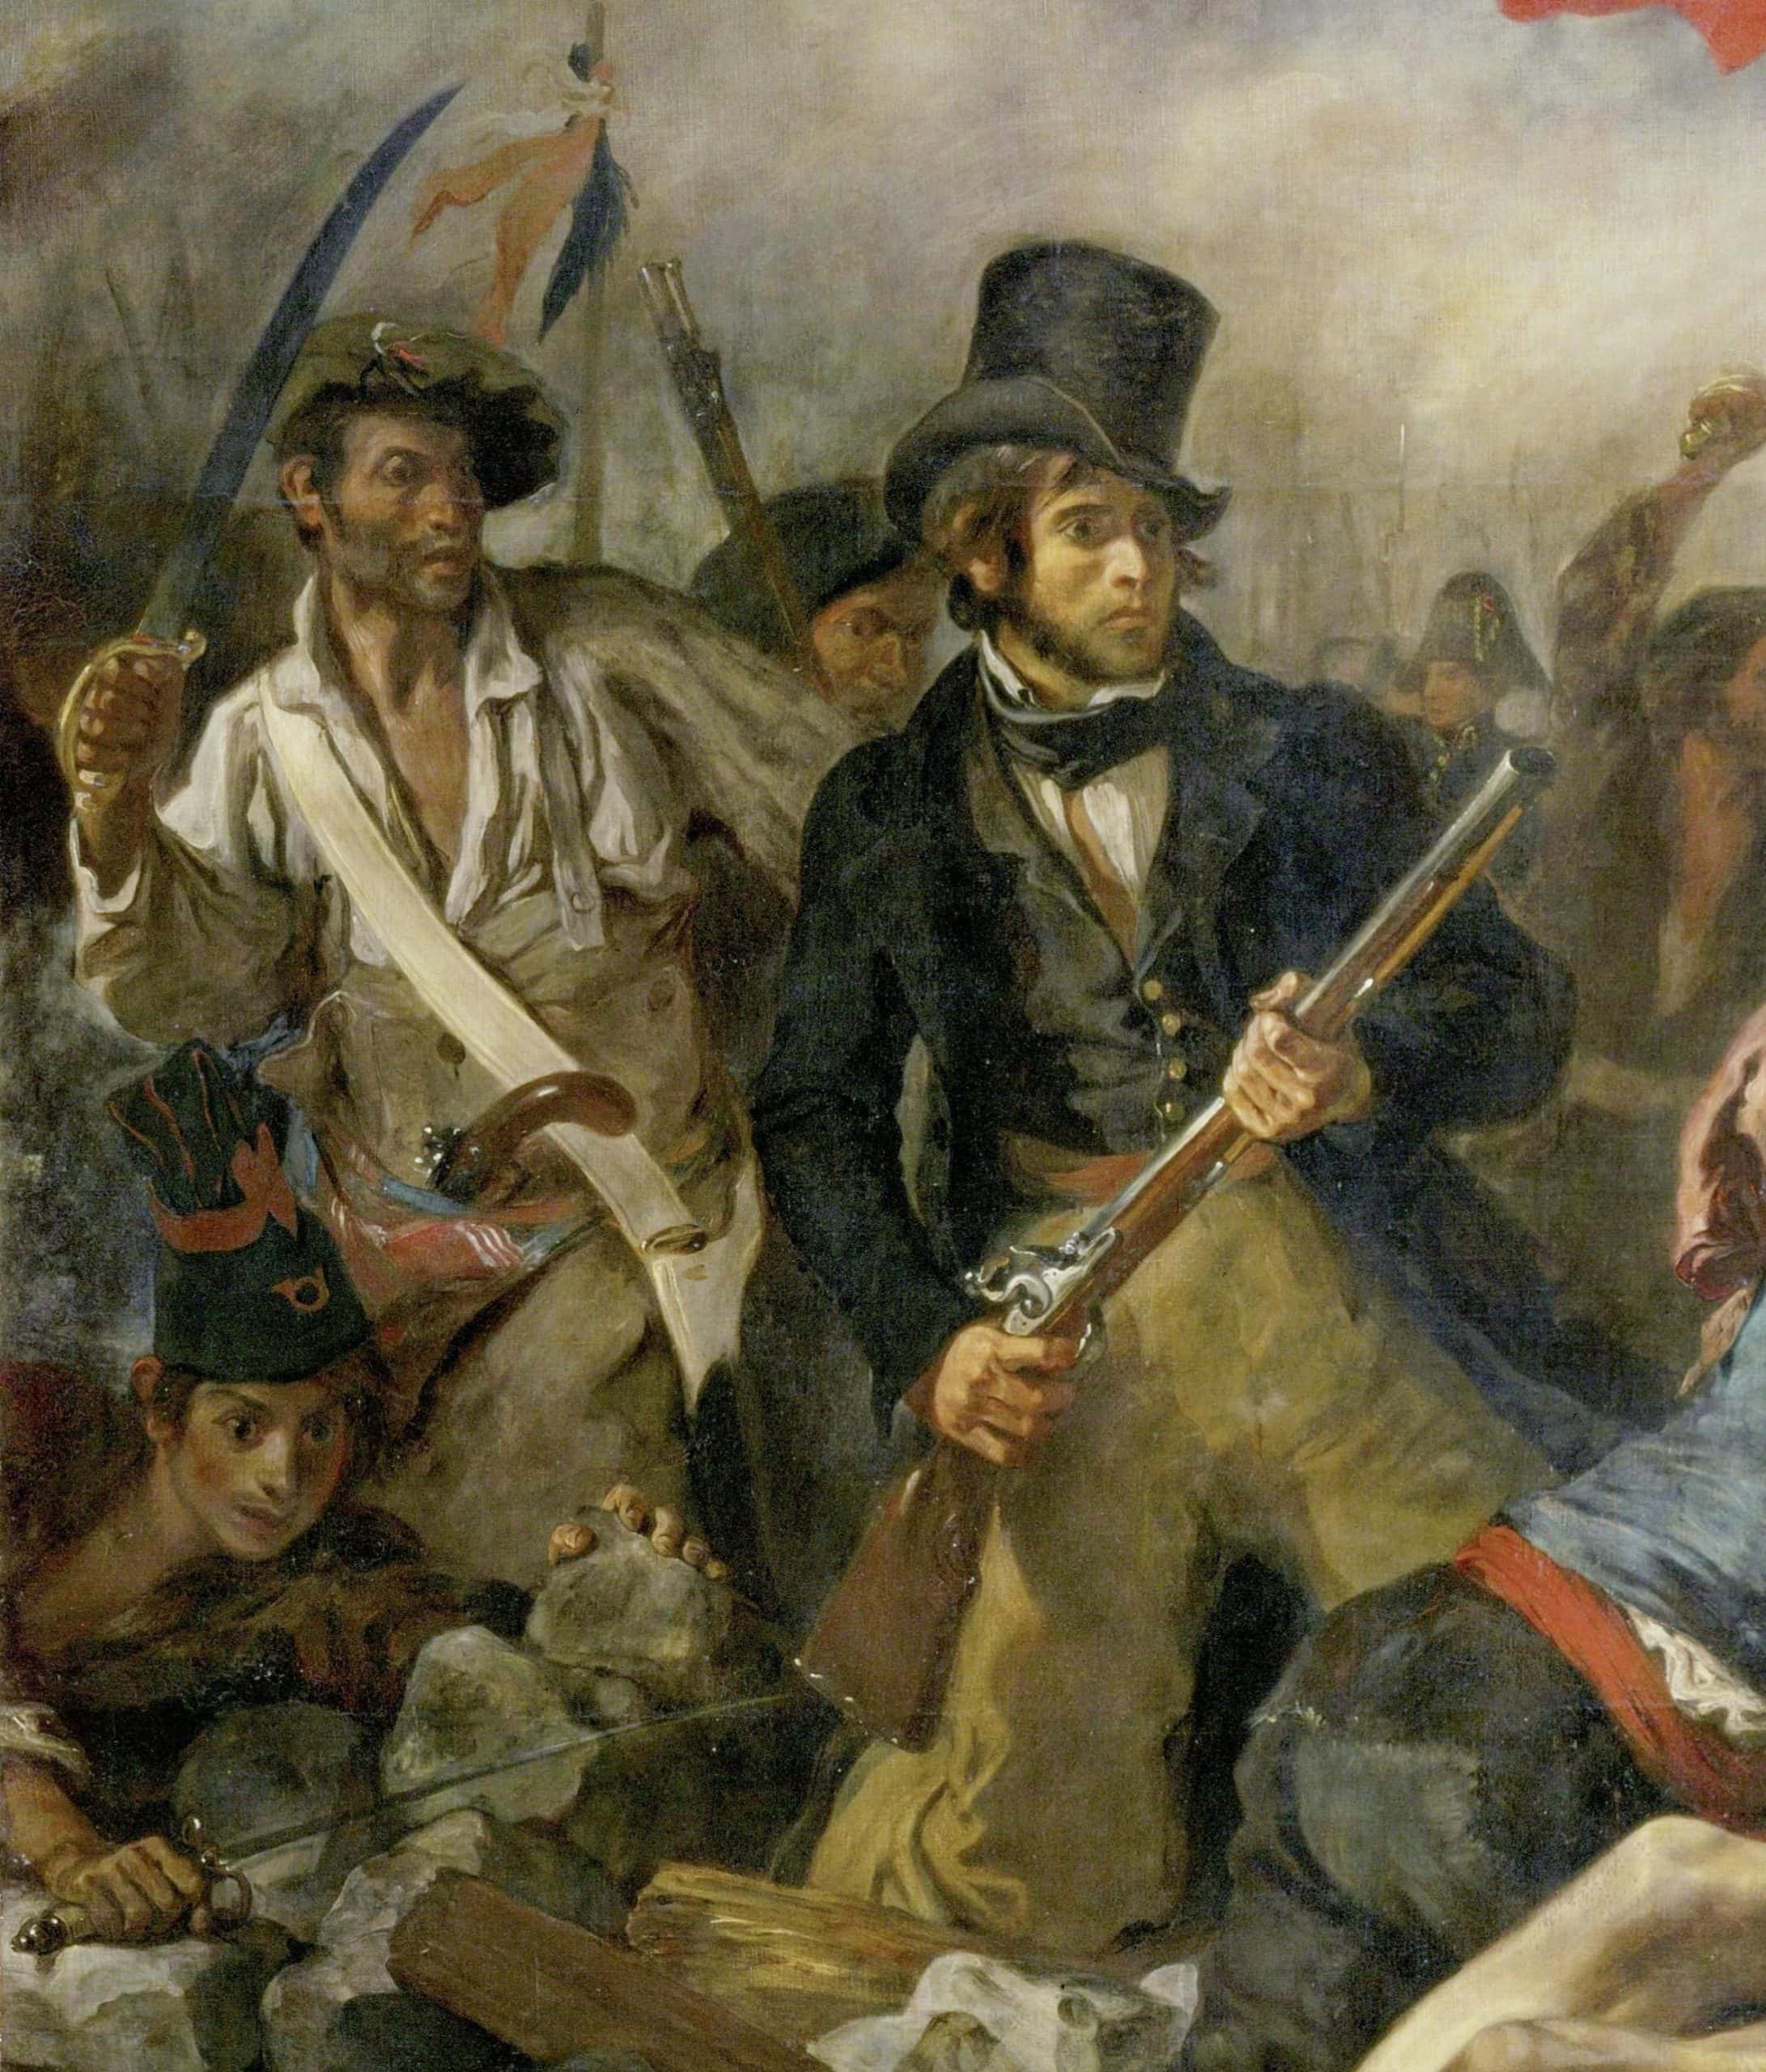 French Revolution Painting Detail